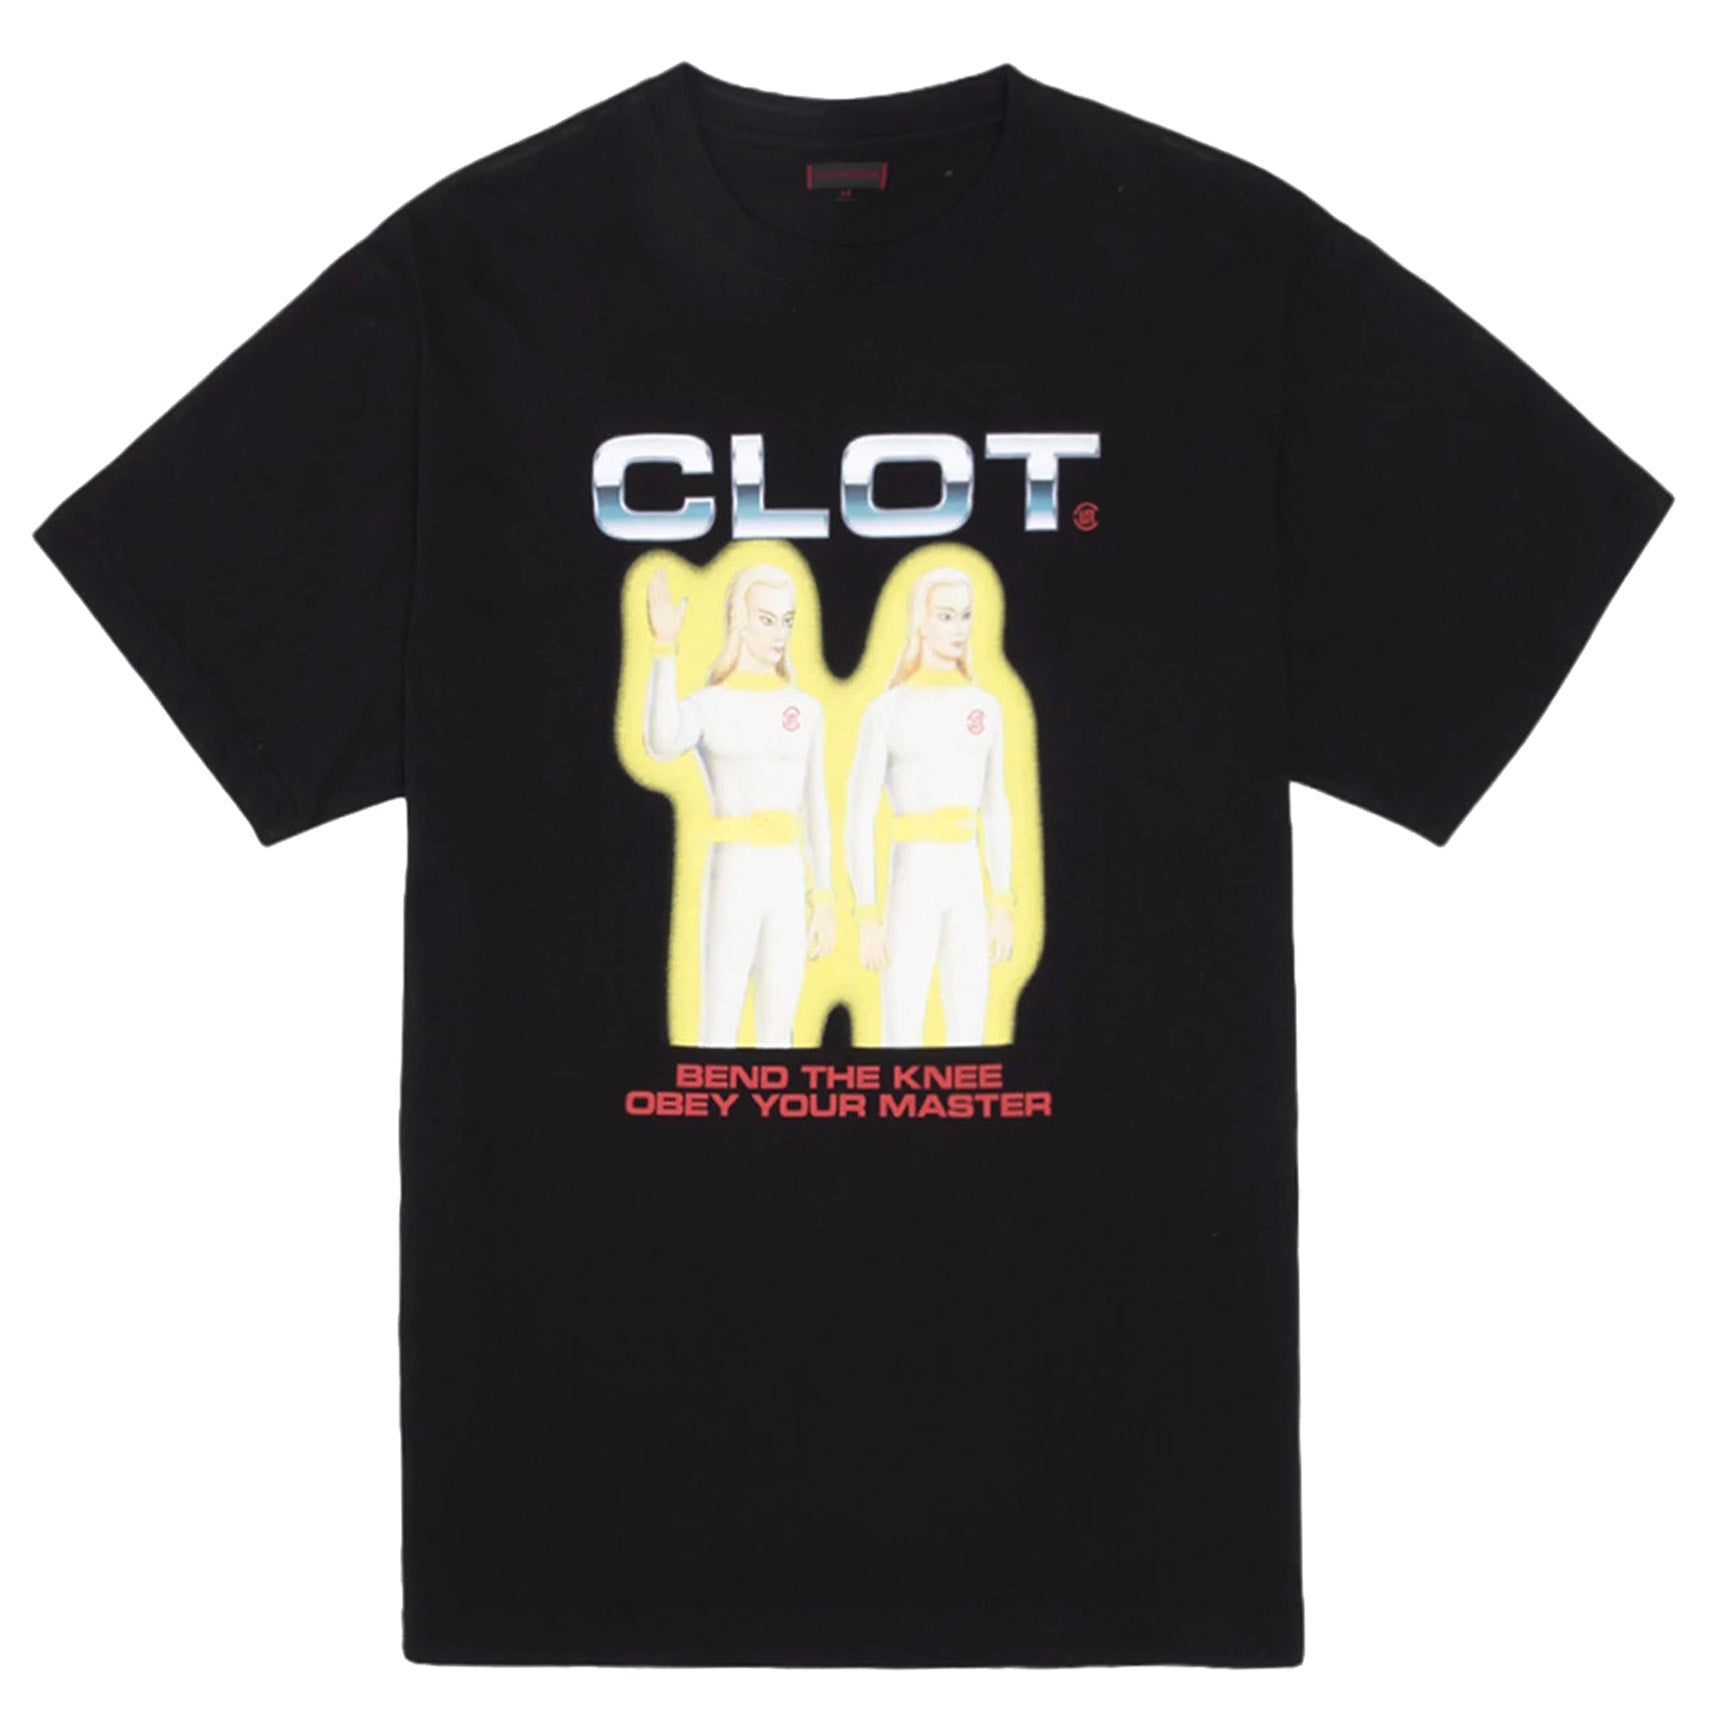 Clot Obey Your Master Tee Black